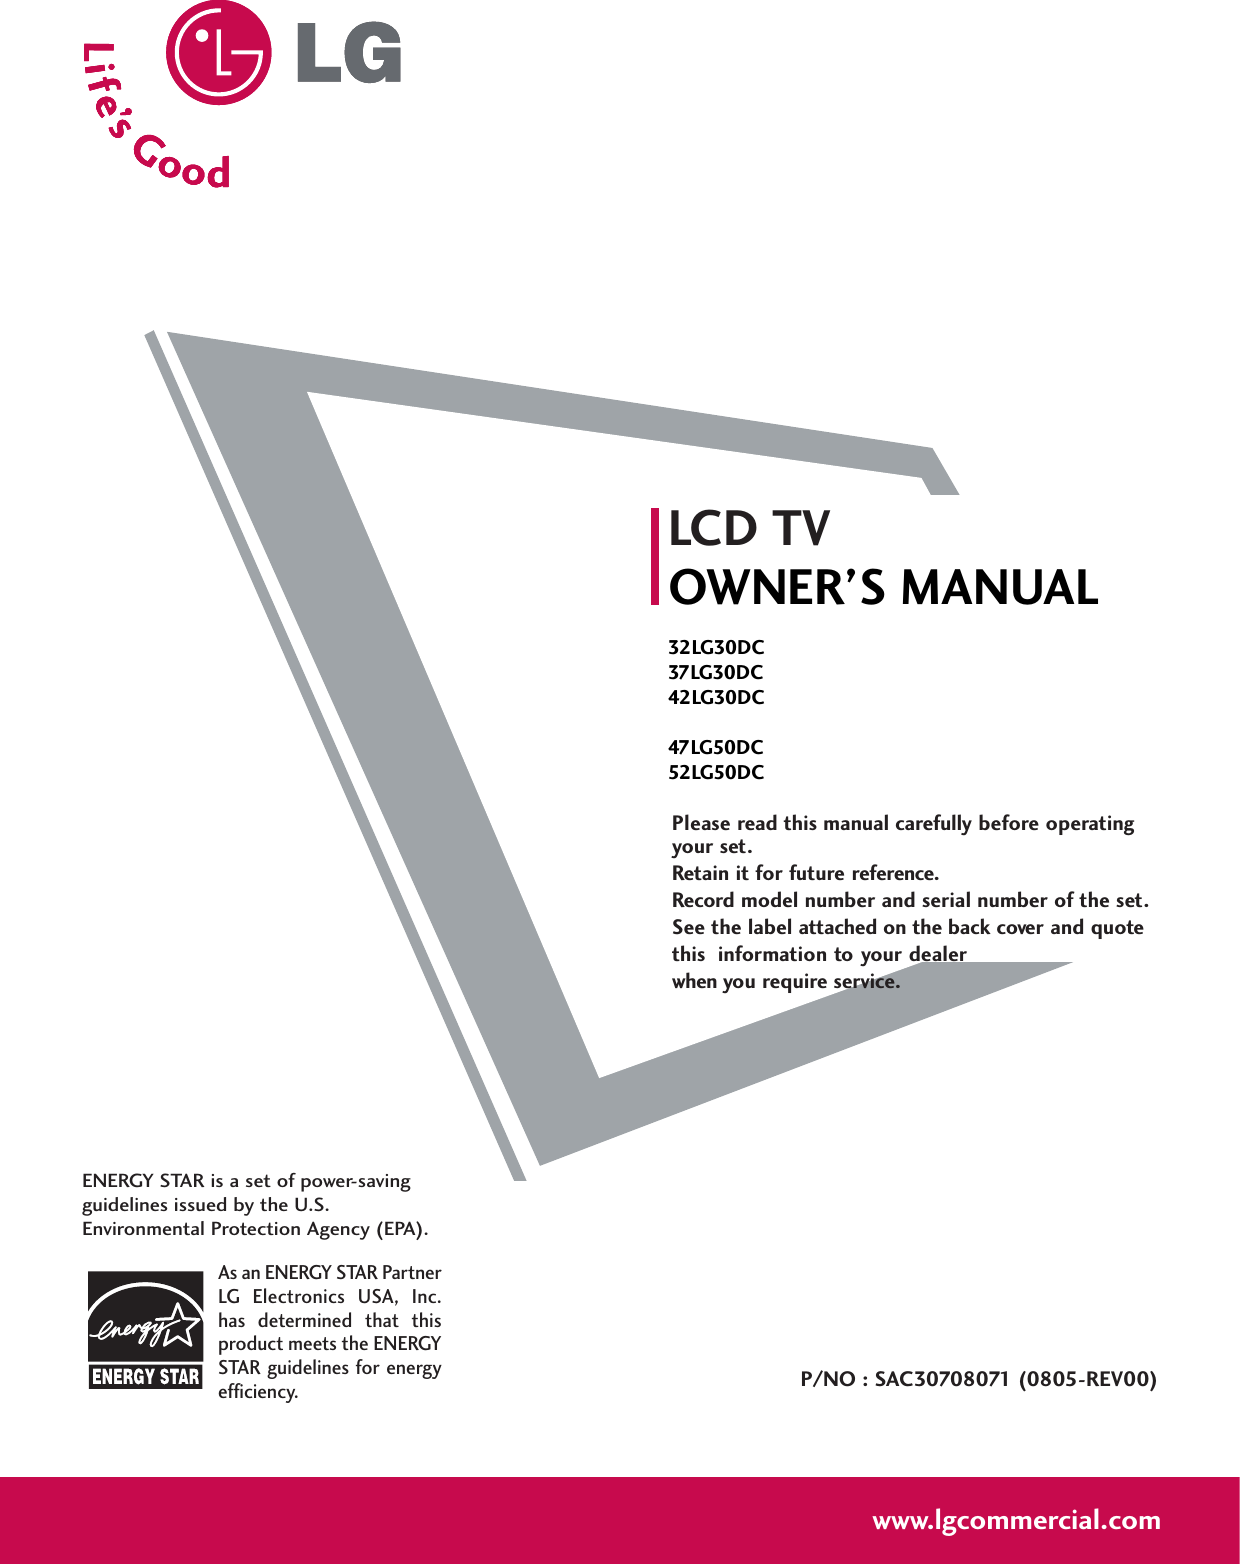 Please read this manual carefully before operatingyour set. Retain it for future reference.Record model number and serial number of the set. See the label attached on the back cover and quote this  information to your dealer when you require service.LCD TVOWNER’S MANUAL32LG30DC37LG30DC42LG30DC47LG50DC52LG50DCP/NO : SAC30708071 (0805-REV00)www.lgcommercial.comAs an ENERGY STAR PartnerLG  Electronics  USA,  Inc.has  determined  that  thisproduct meets the ENERGYSTAR guidelines for energyefficiency.ENERGY STAR is a set of power-savingguidelines issued by the U.S.Environmental Protection Agency (EPA).